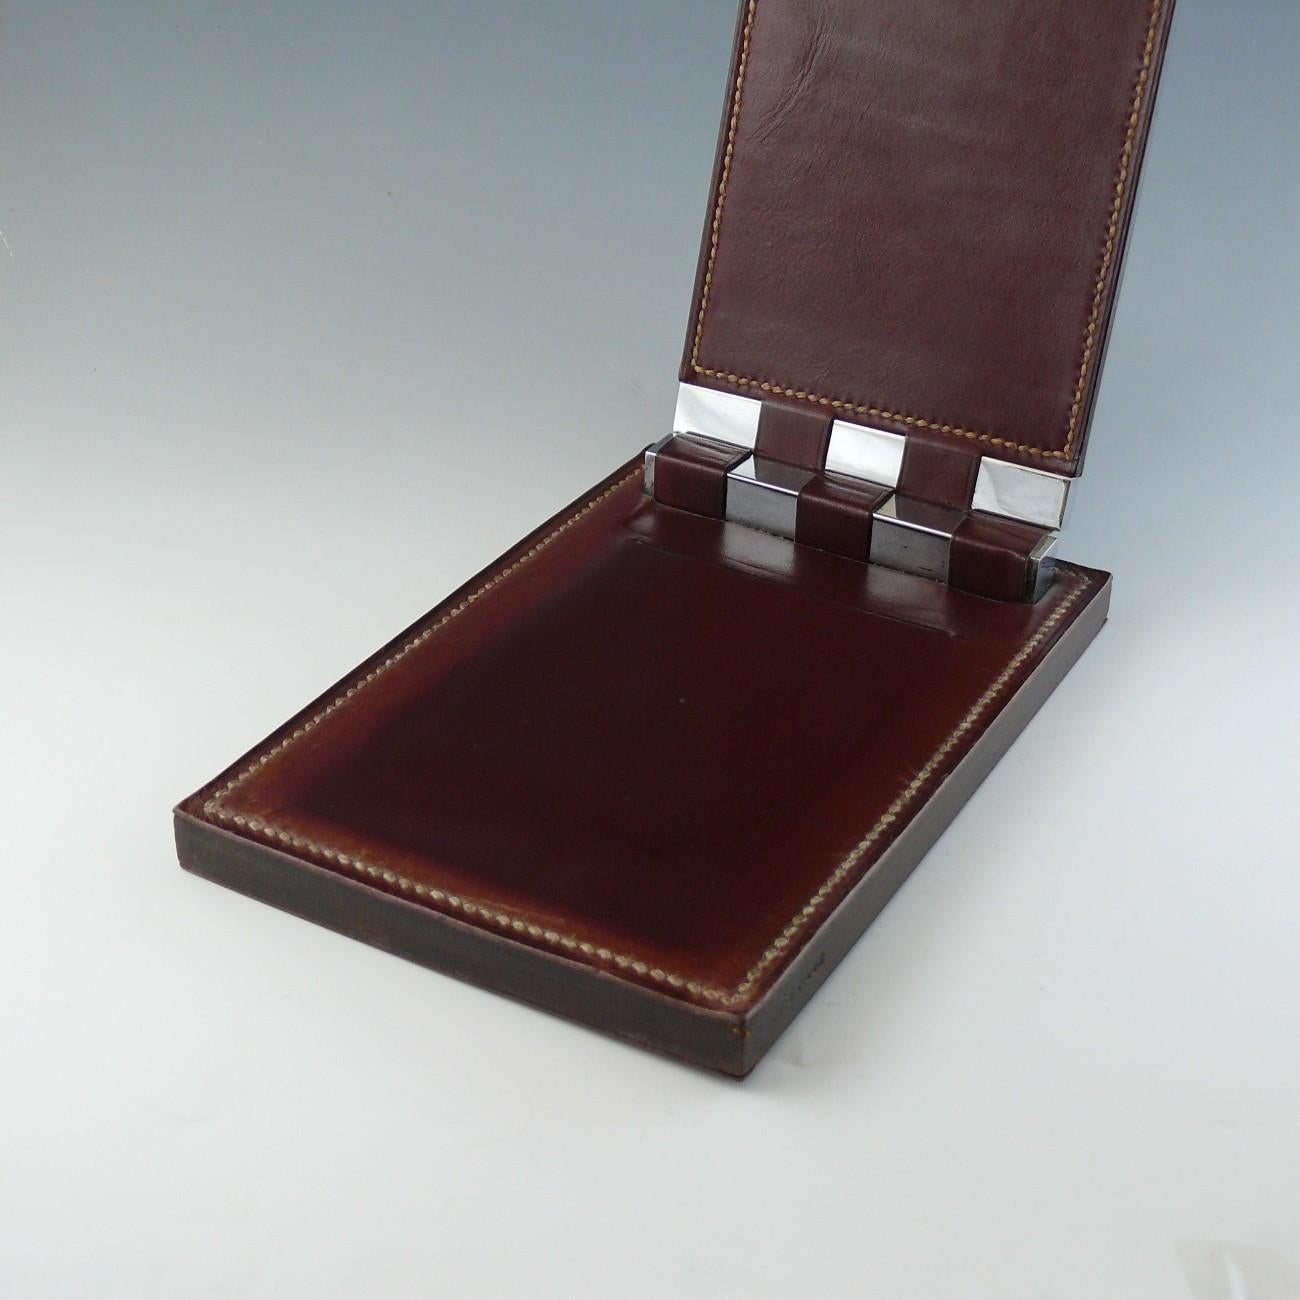 A stylish Hermès note pad in ox blood leather designed by famed French decorator Paul Dupré-Lafon, circa 1935.

Dimensions: 20 cm/8 inches x 13.5 cm/5¼ inches

Bentleys are Members of LAPADA, the London and Provincial Antique Dealers